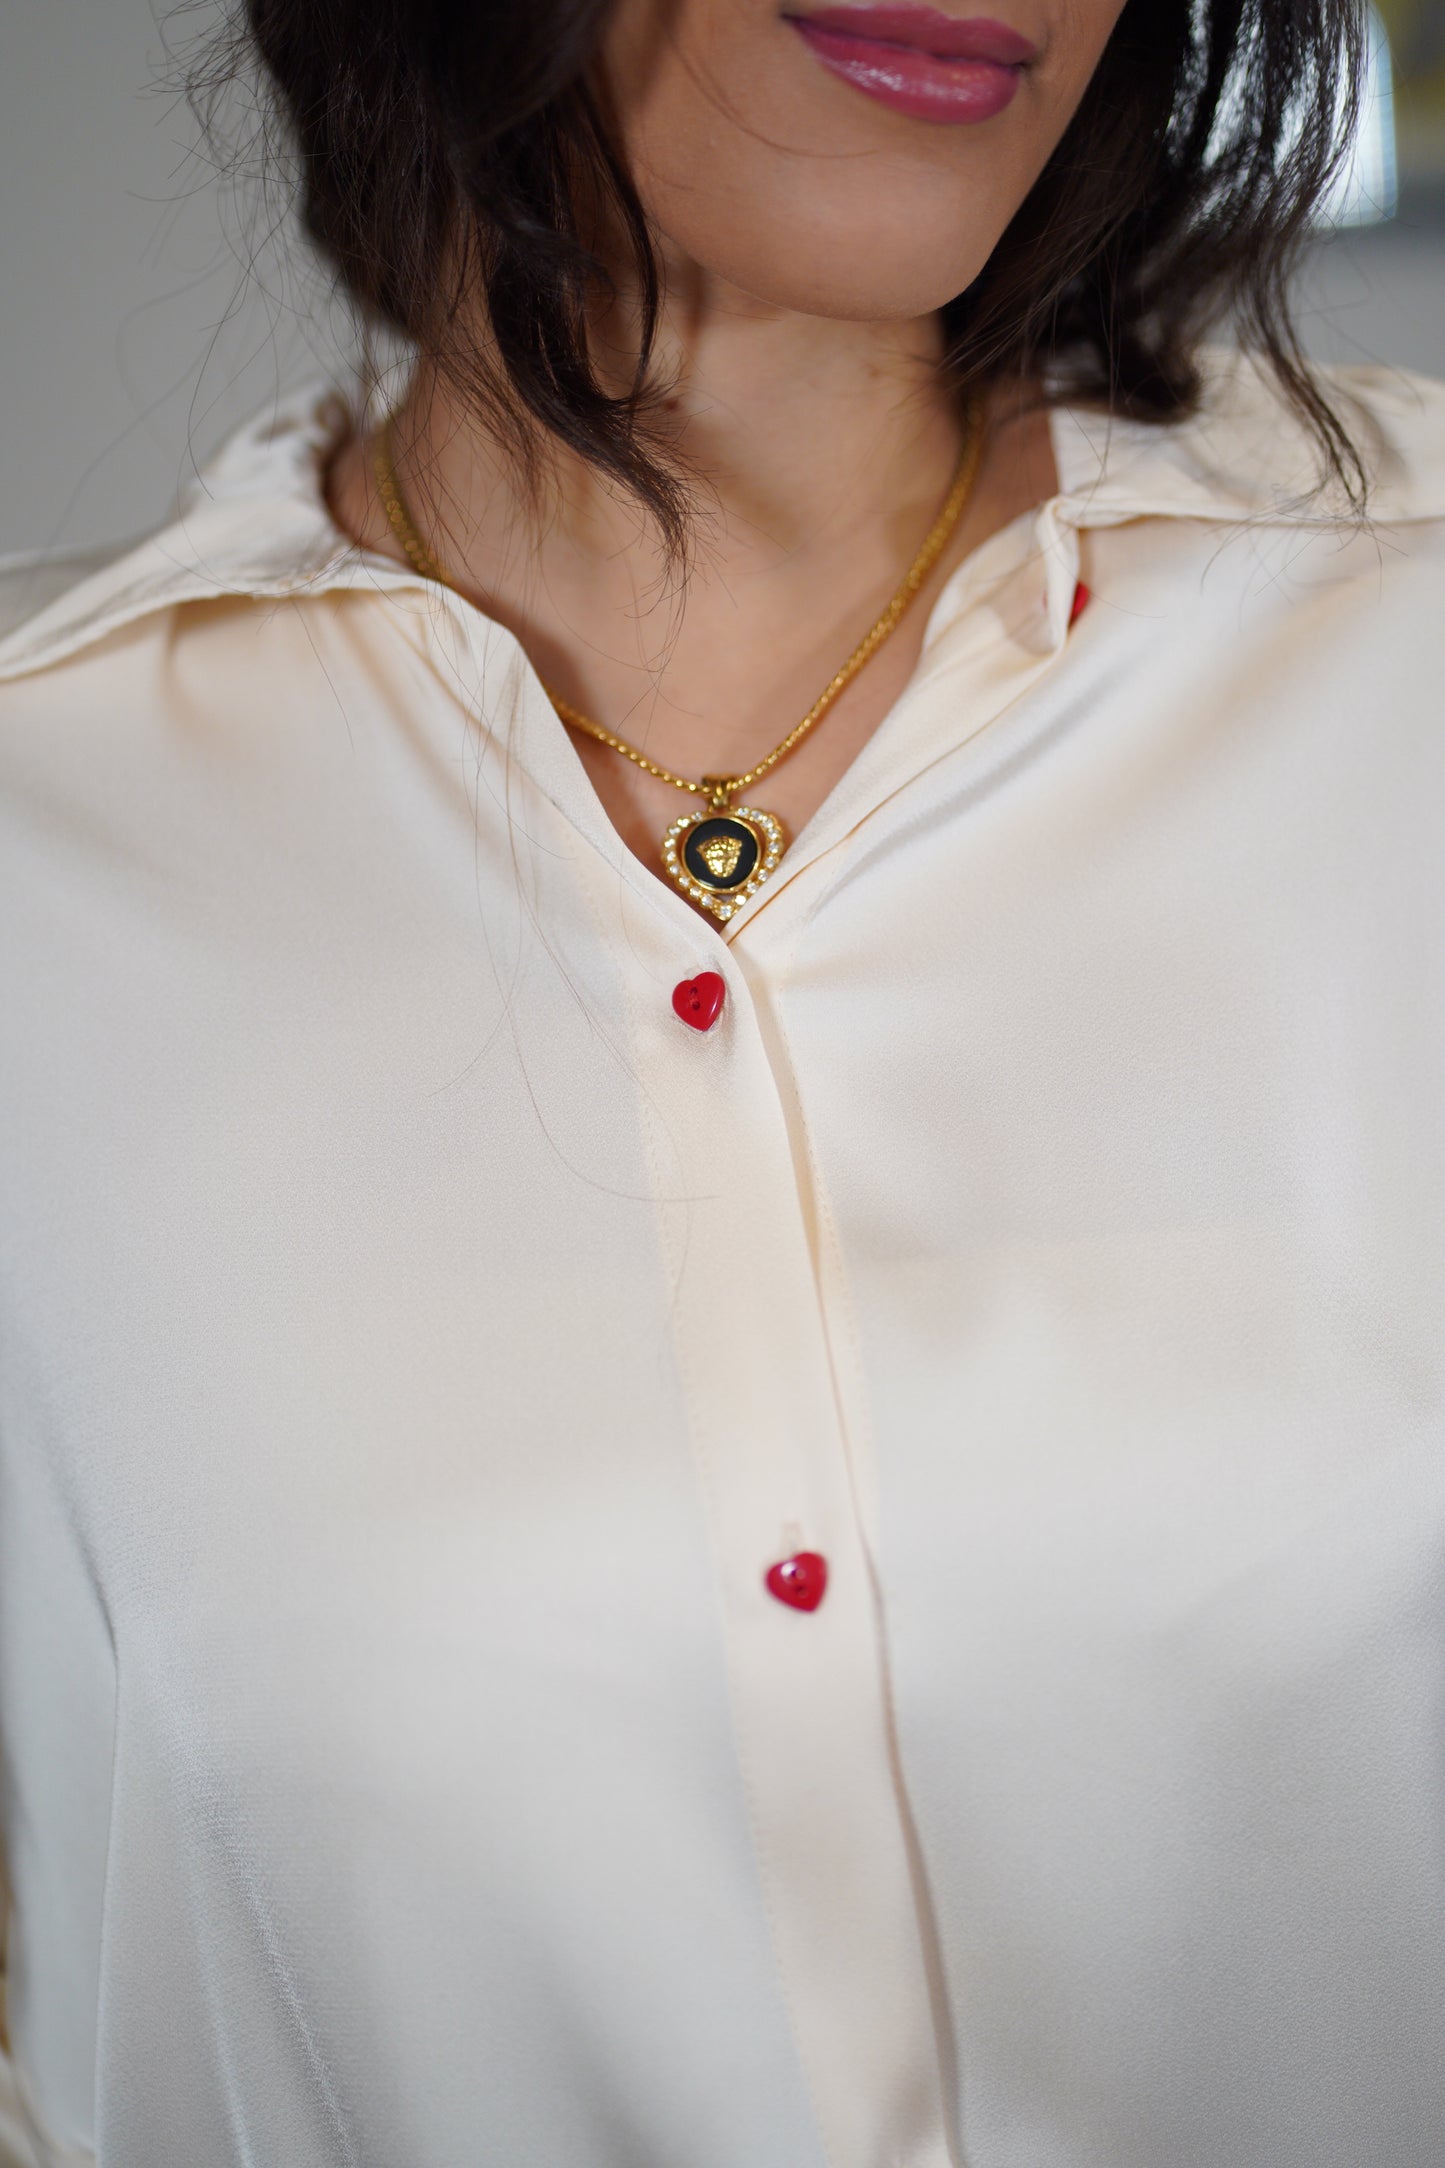 The Satin Button-up in Ivory